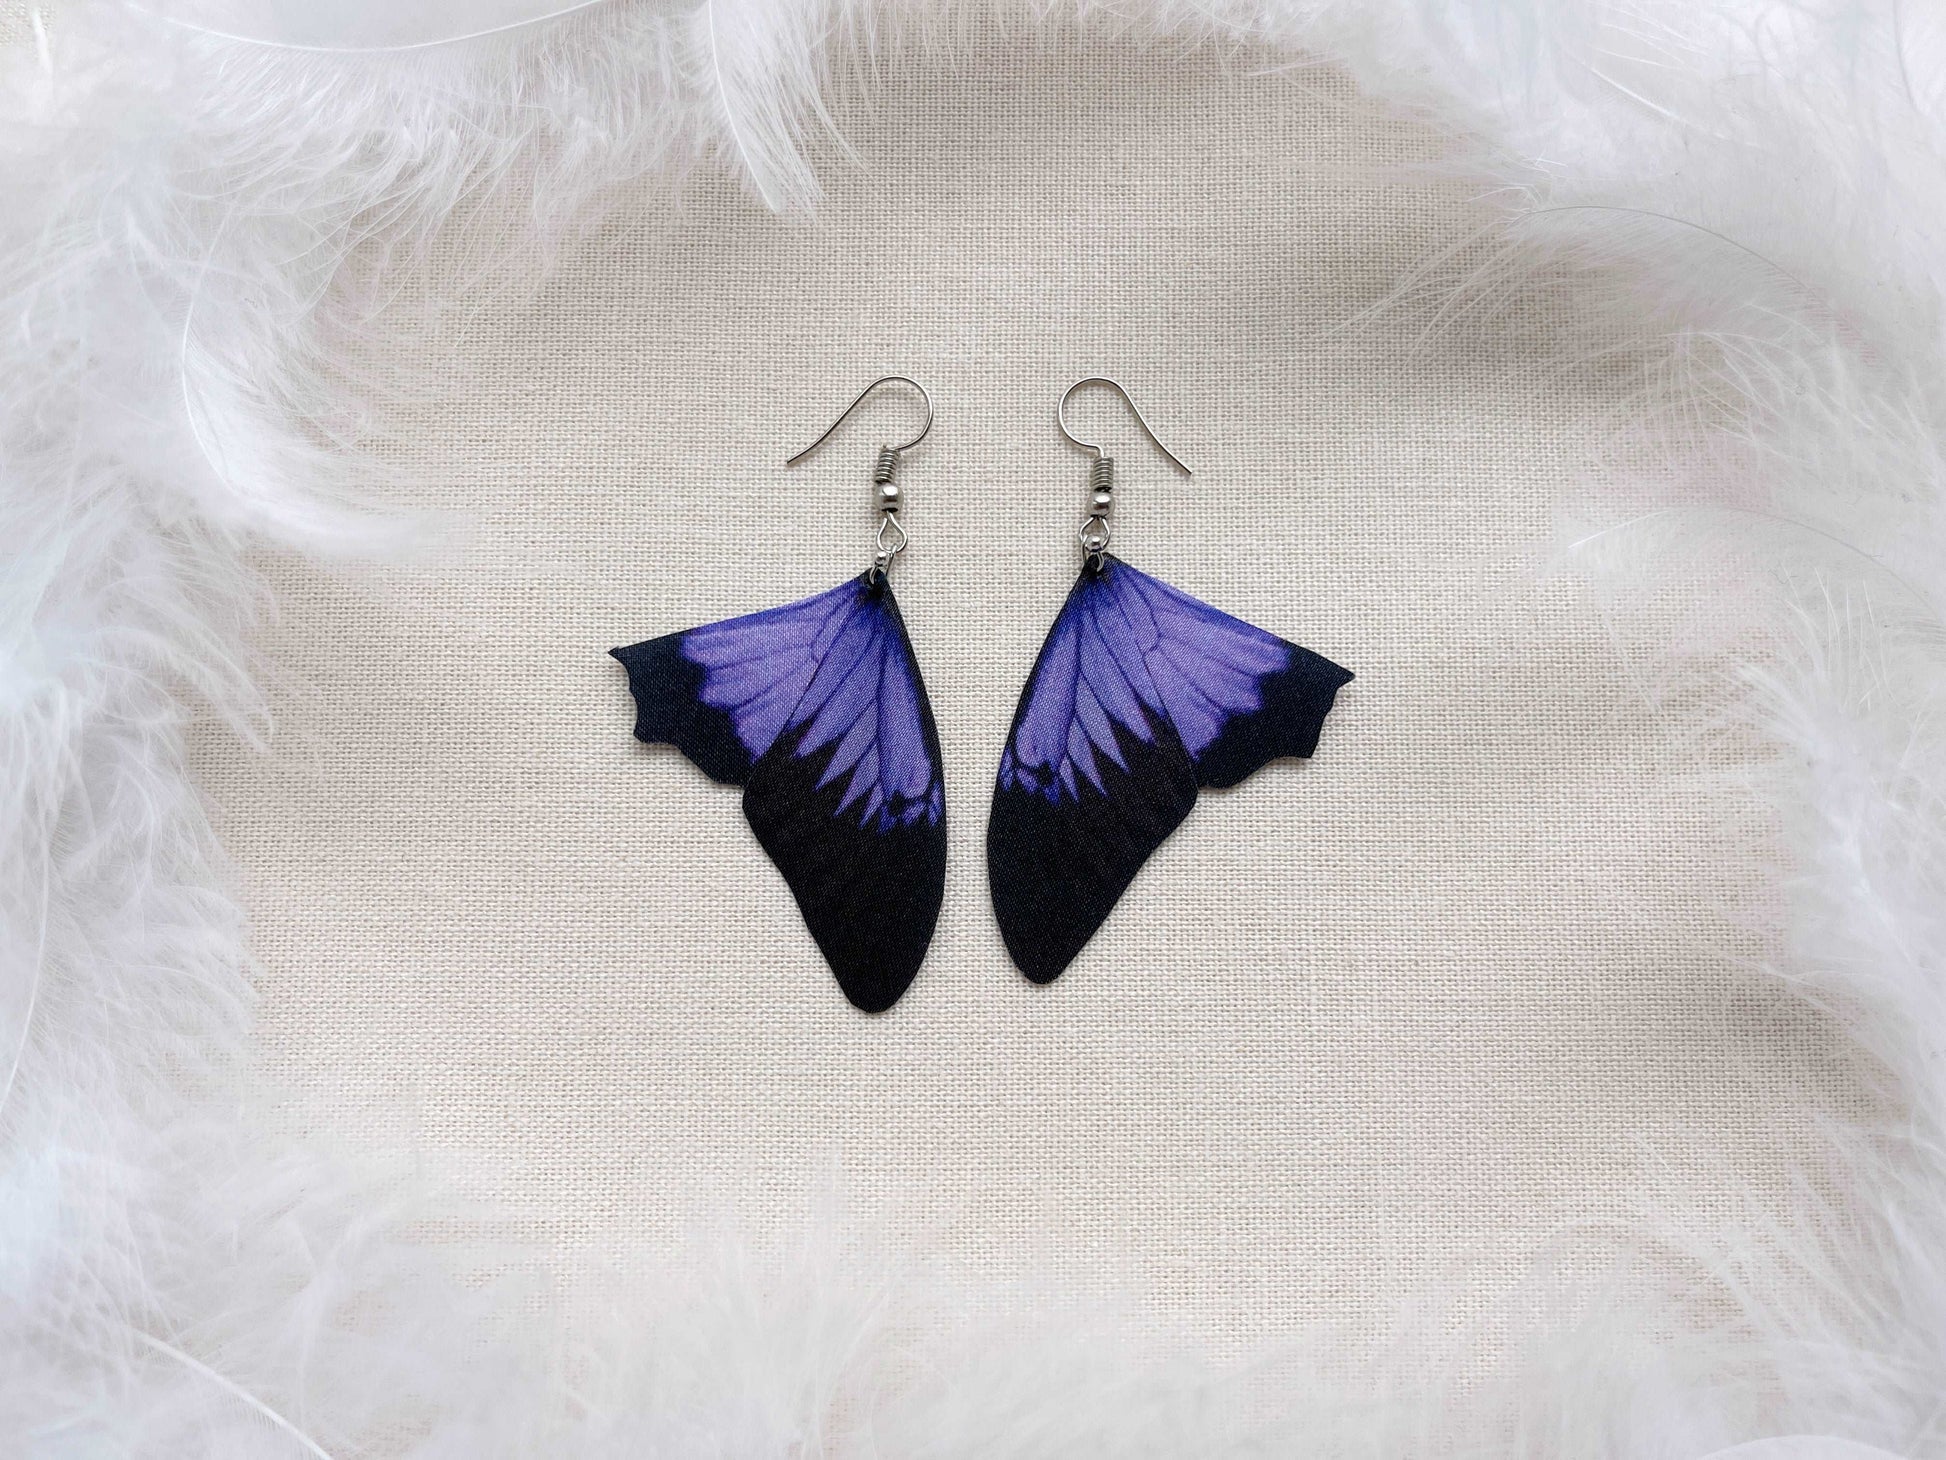 Lilac wing earrings - perfect for any occasion